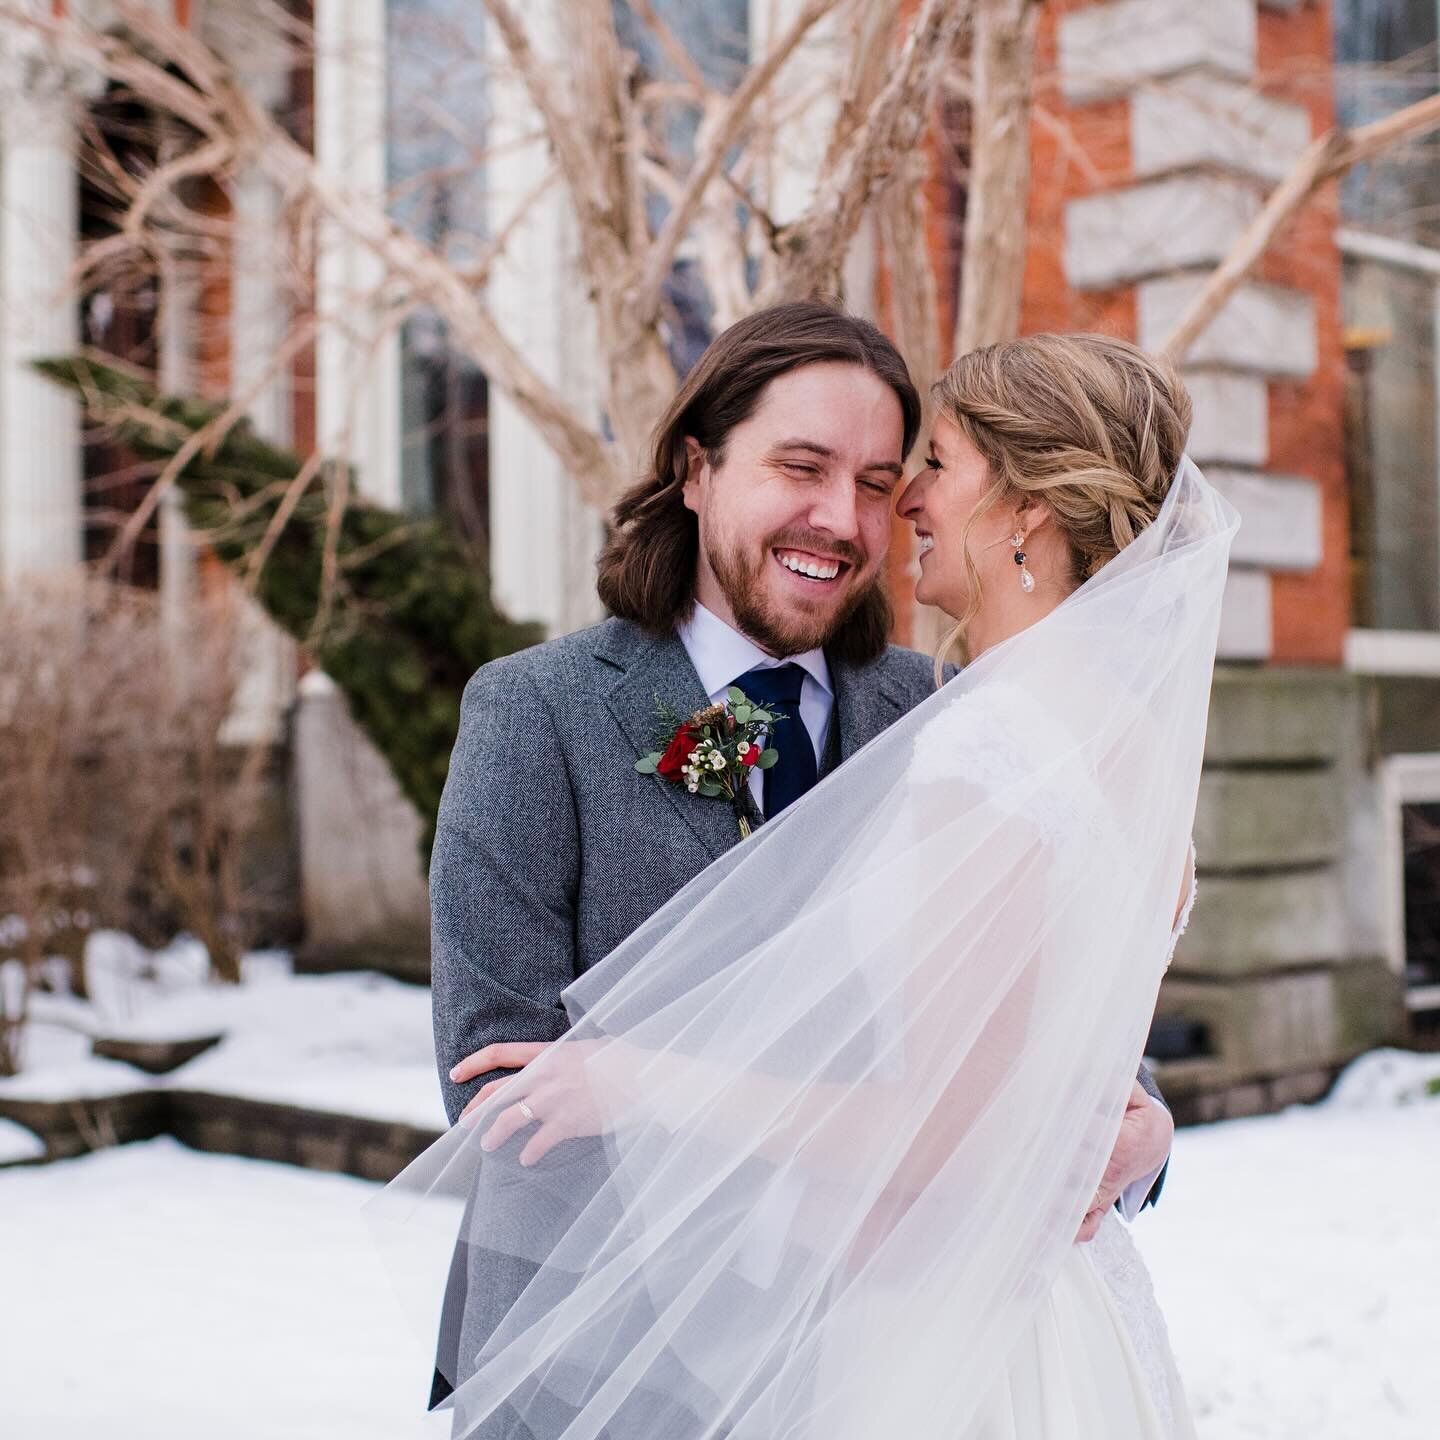 Still feeling all the feels for Holly &amp; Sam and their beautiful, intimate winter wedding day celebrated one year ago tomorrow! Wishing you the happiest anniversary!! ❤️